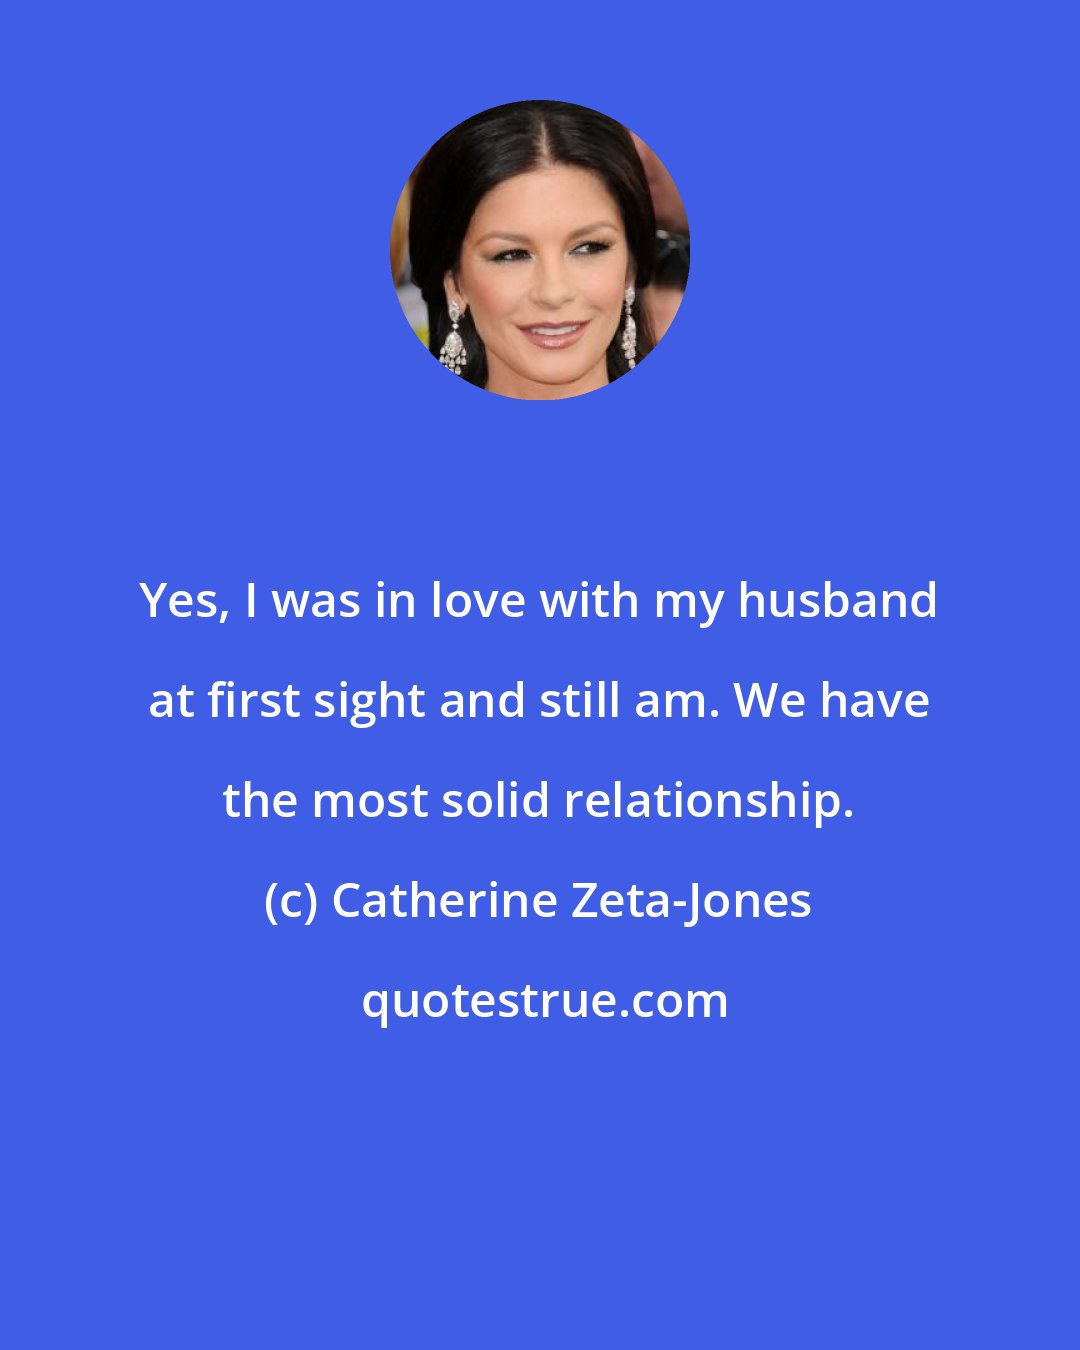 Catherine Zeta-Jones: Yes, I was in love with my husband at first sight and still am. We have the most solid relationship.